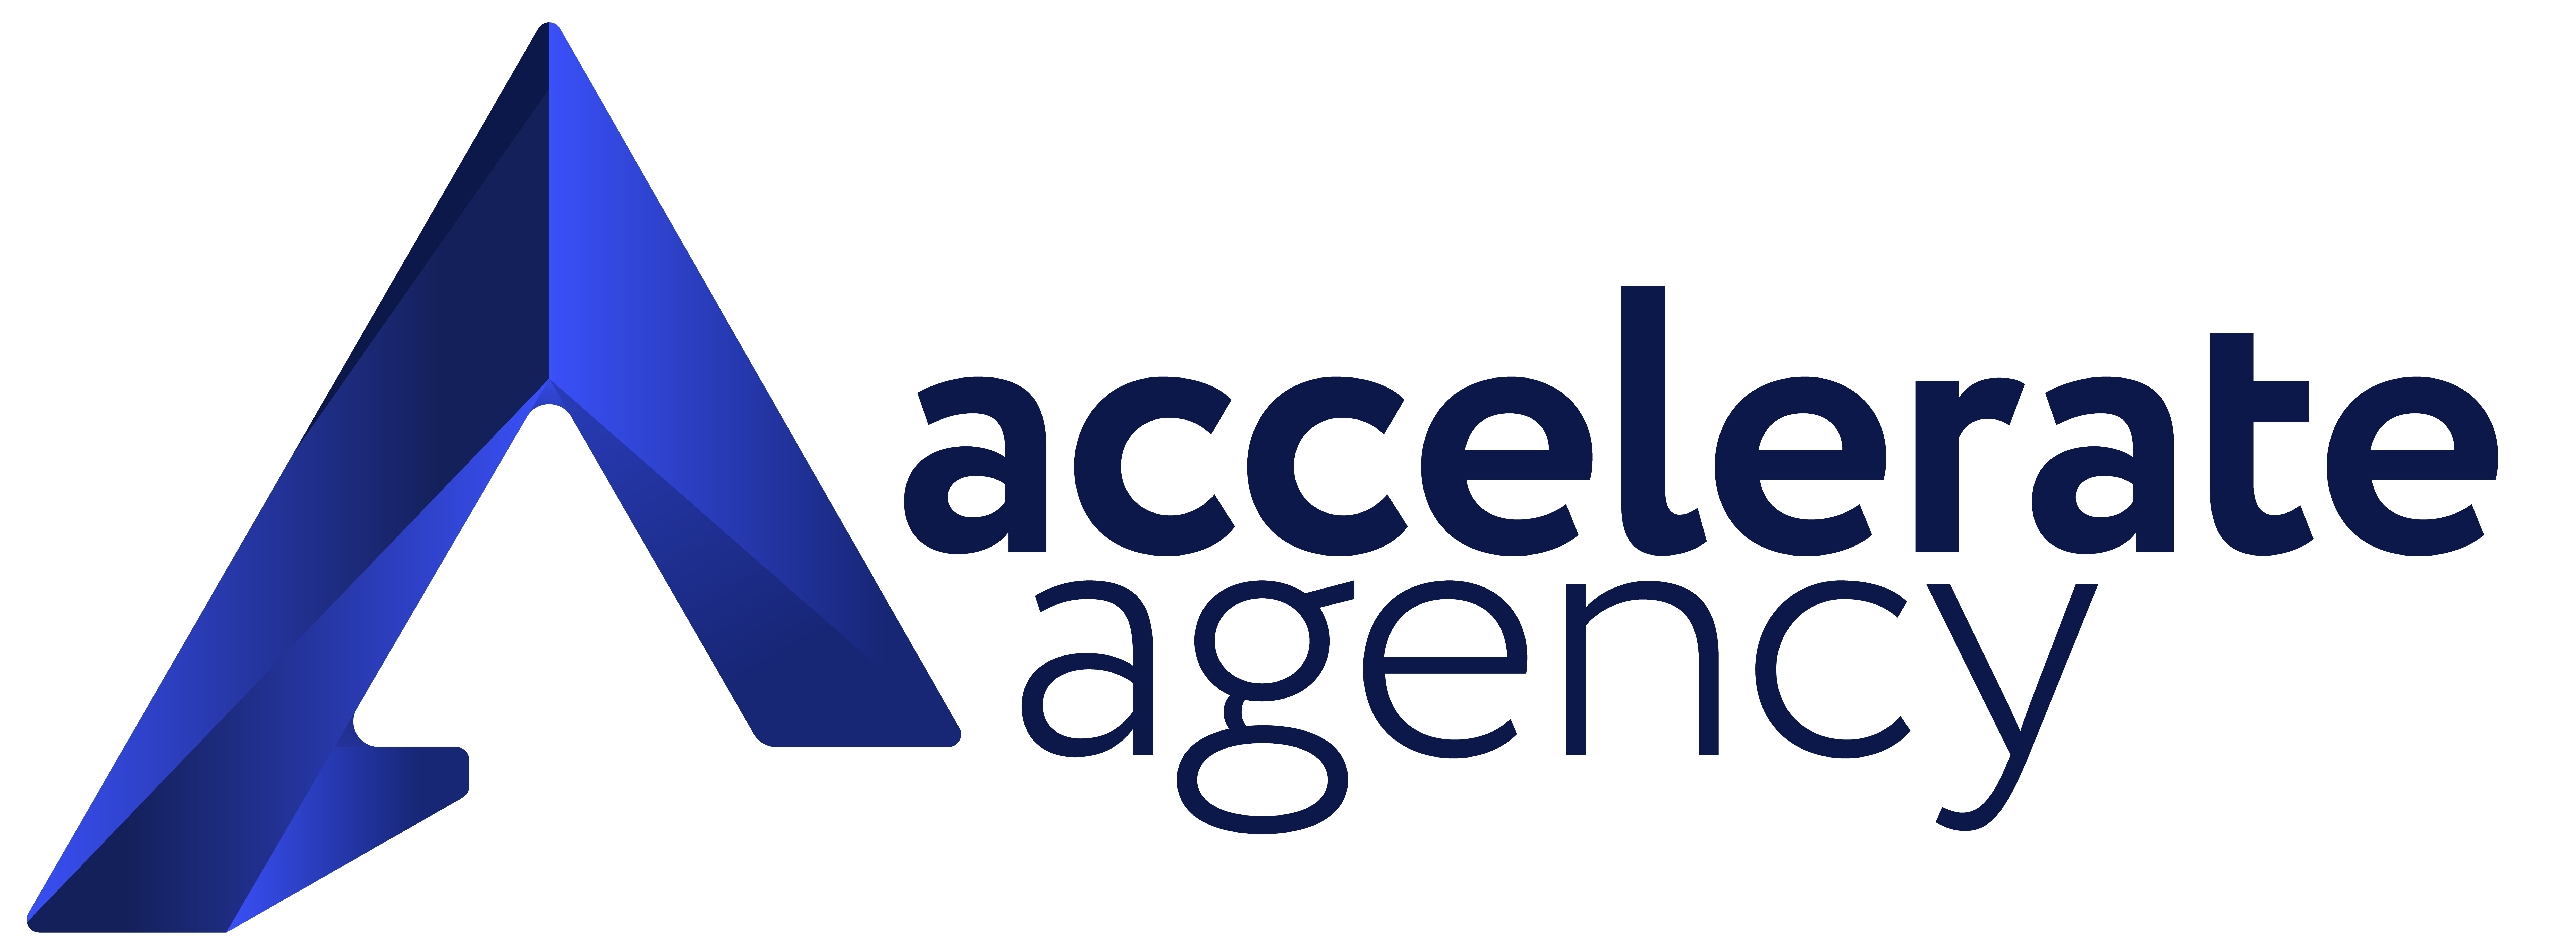 Accelerate Agency